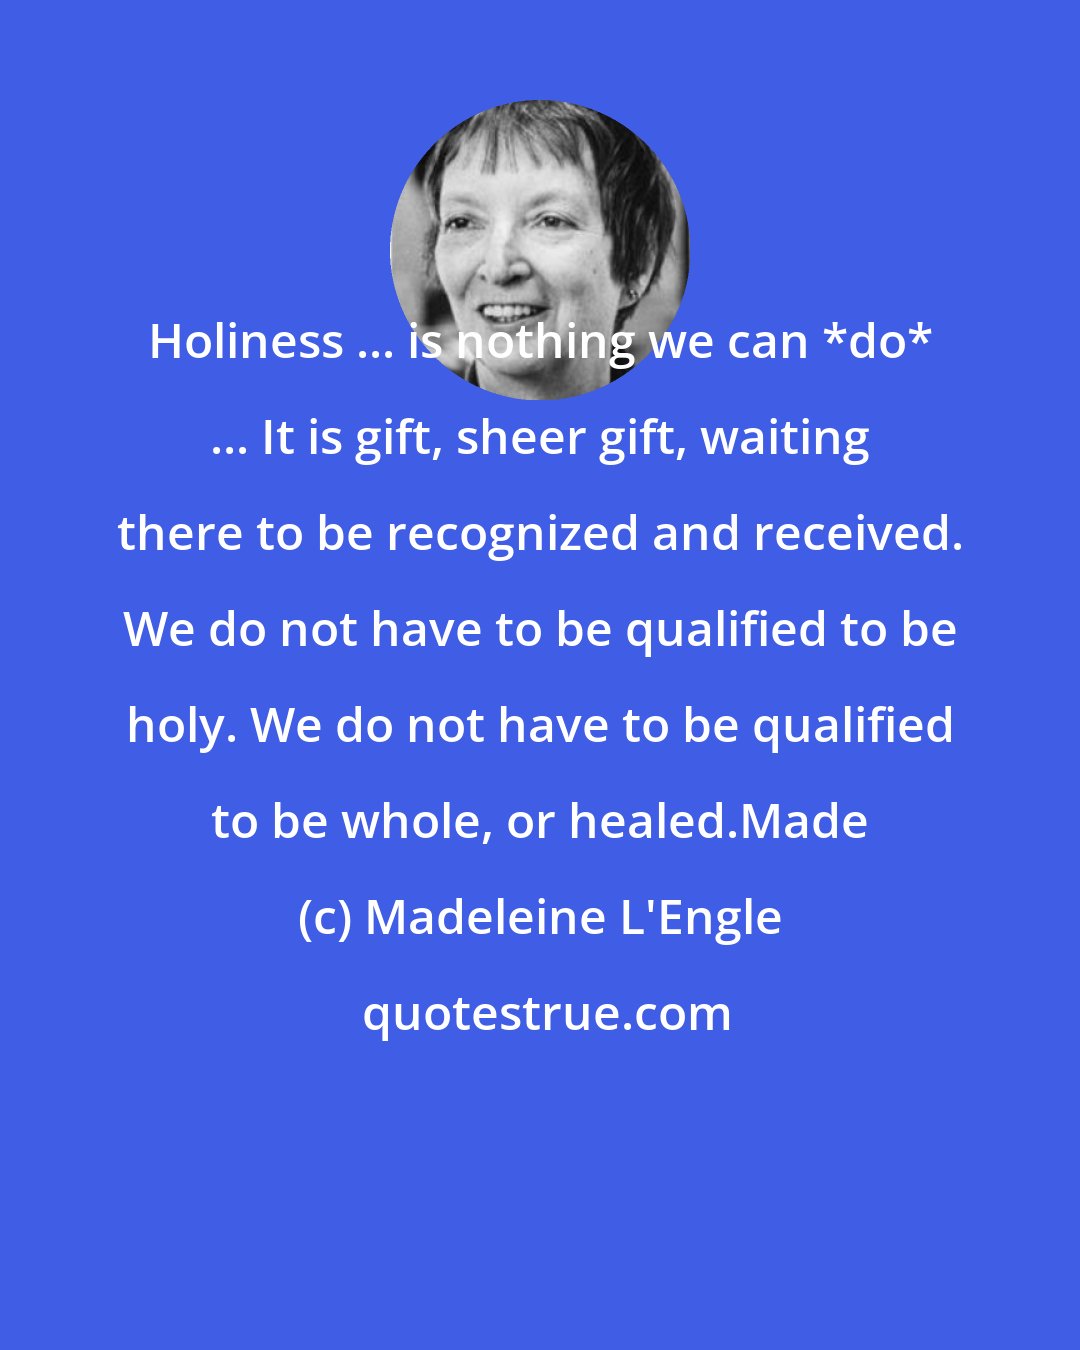 Madeleine L'Engle: Holiness ... is nothing we can *do* ... It is gift, sheer gift, waiting there to be recognized and received. We do not have to be qualified to be holy. We do not have to be qualified to be whole, or healed.Made